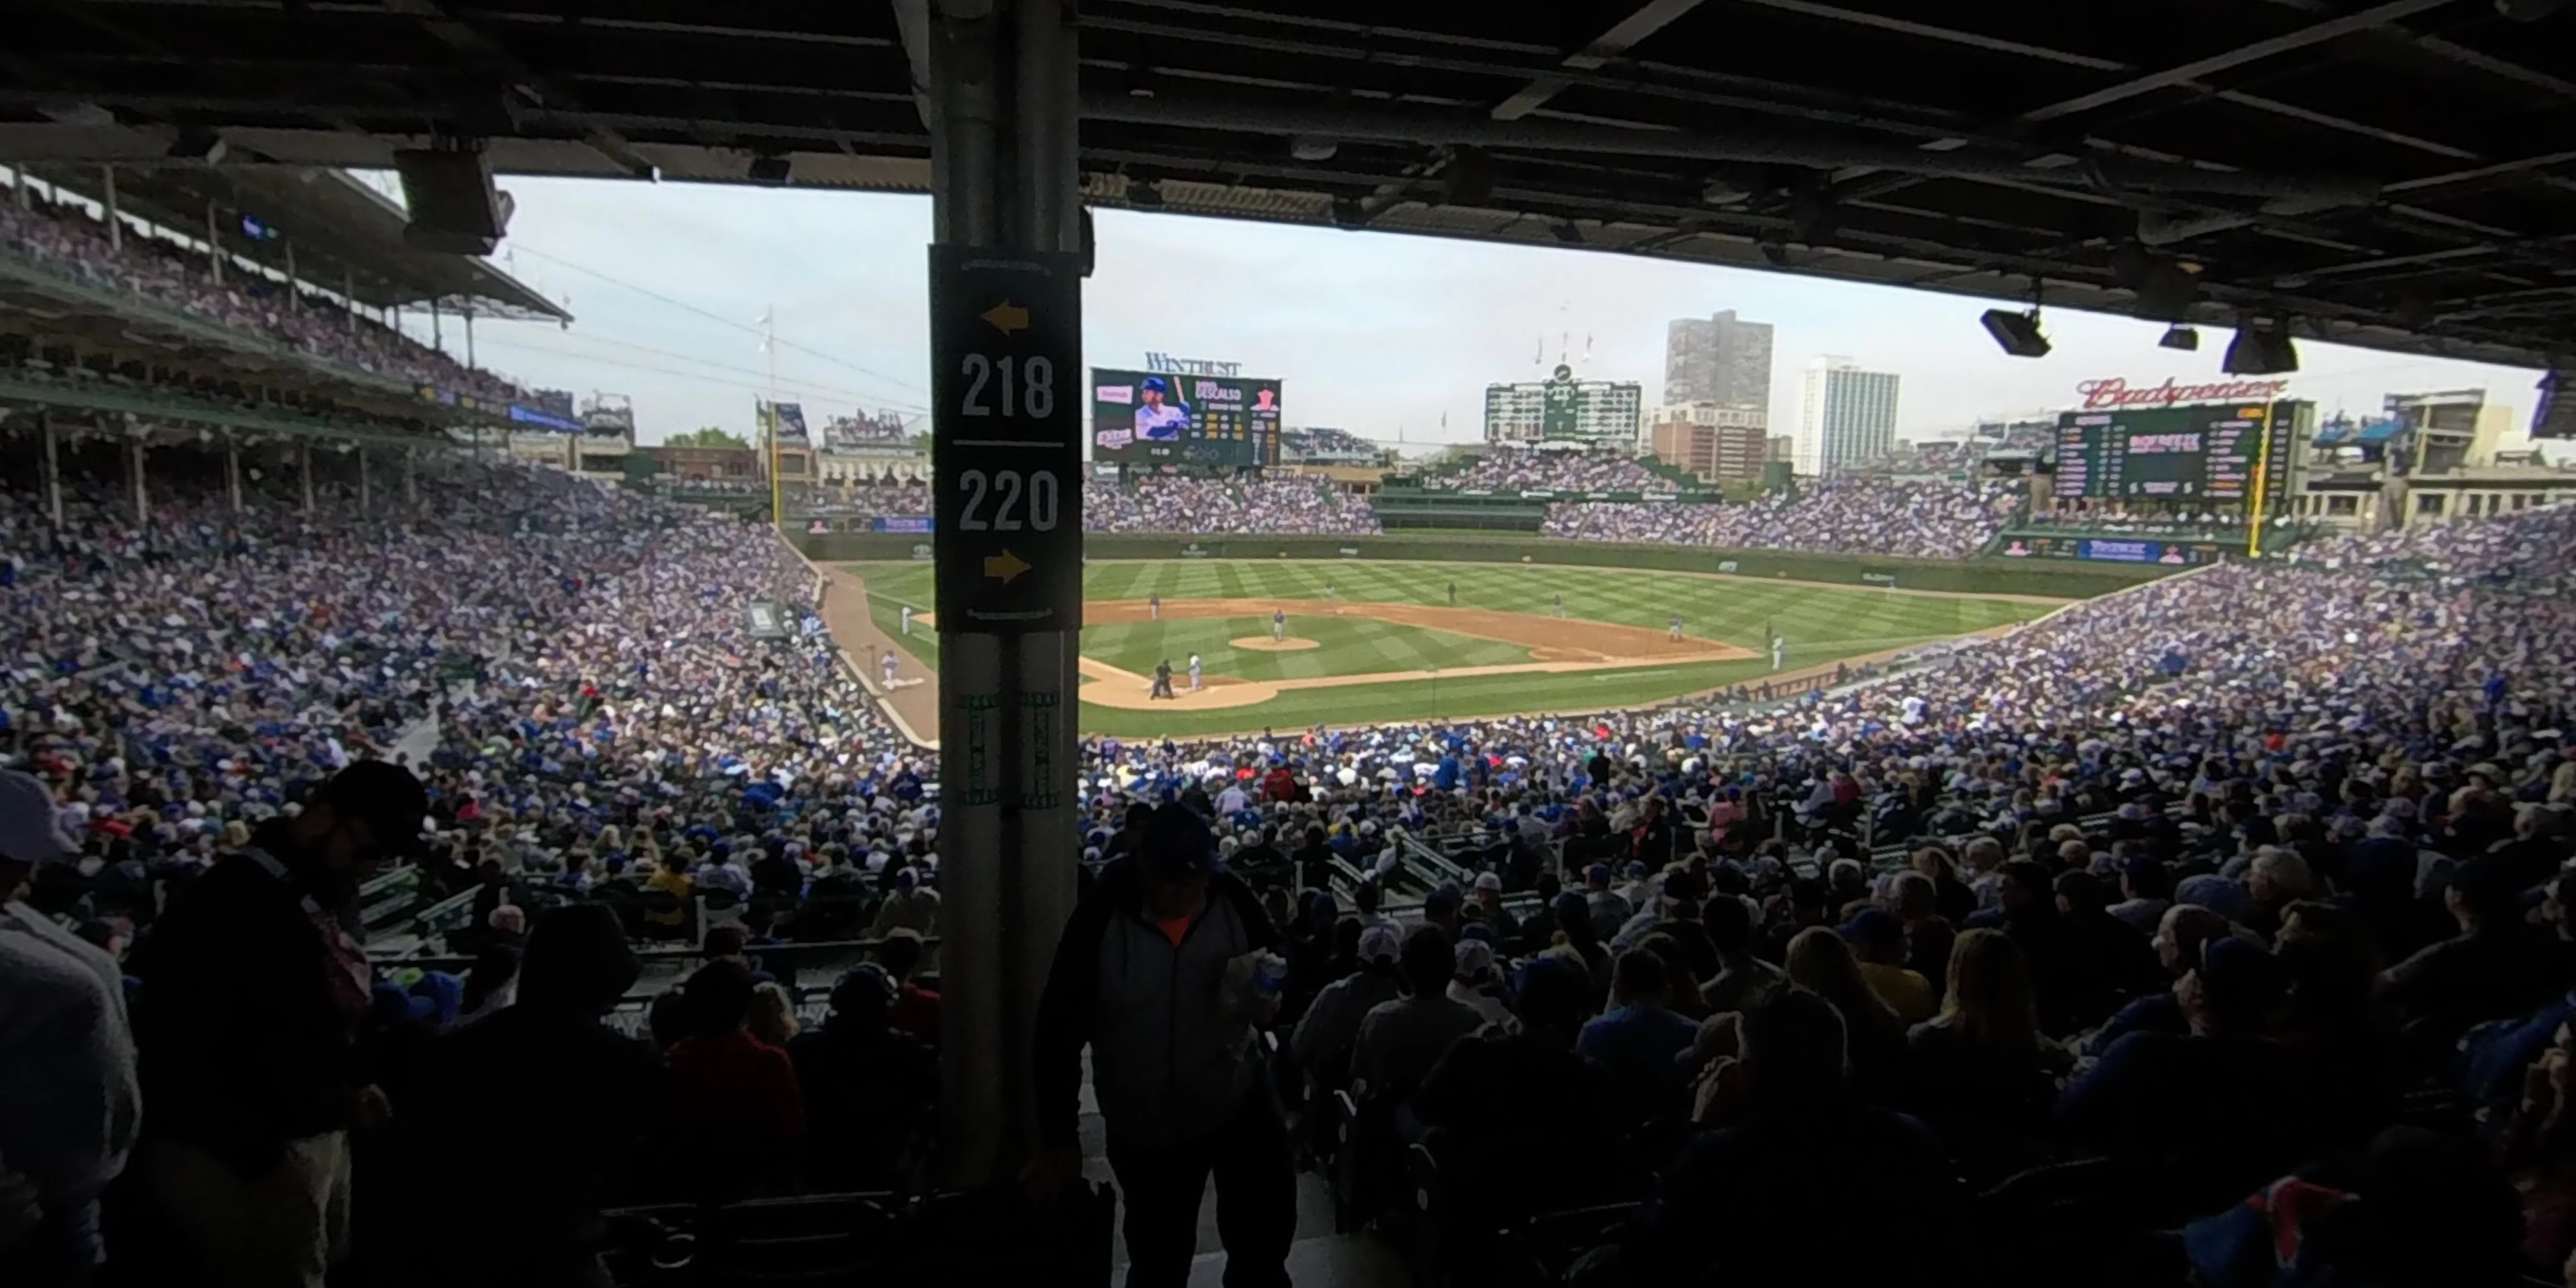 section 218 panoramic seat view  for baseball - wrigley field